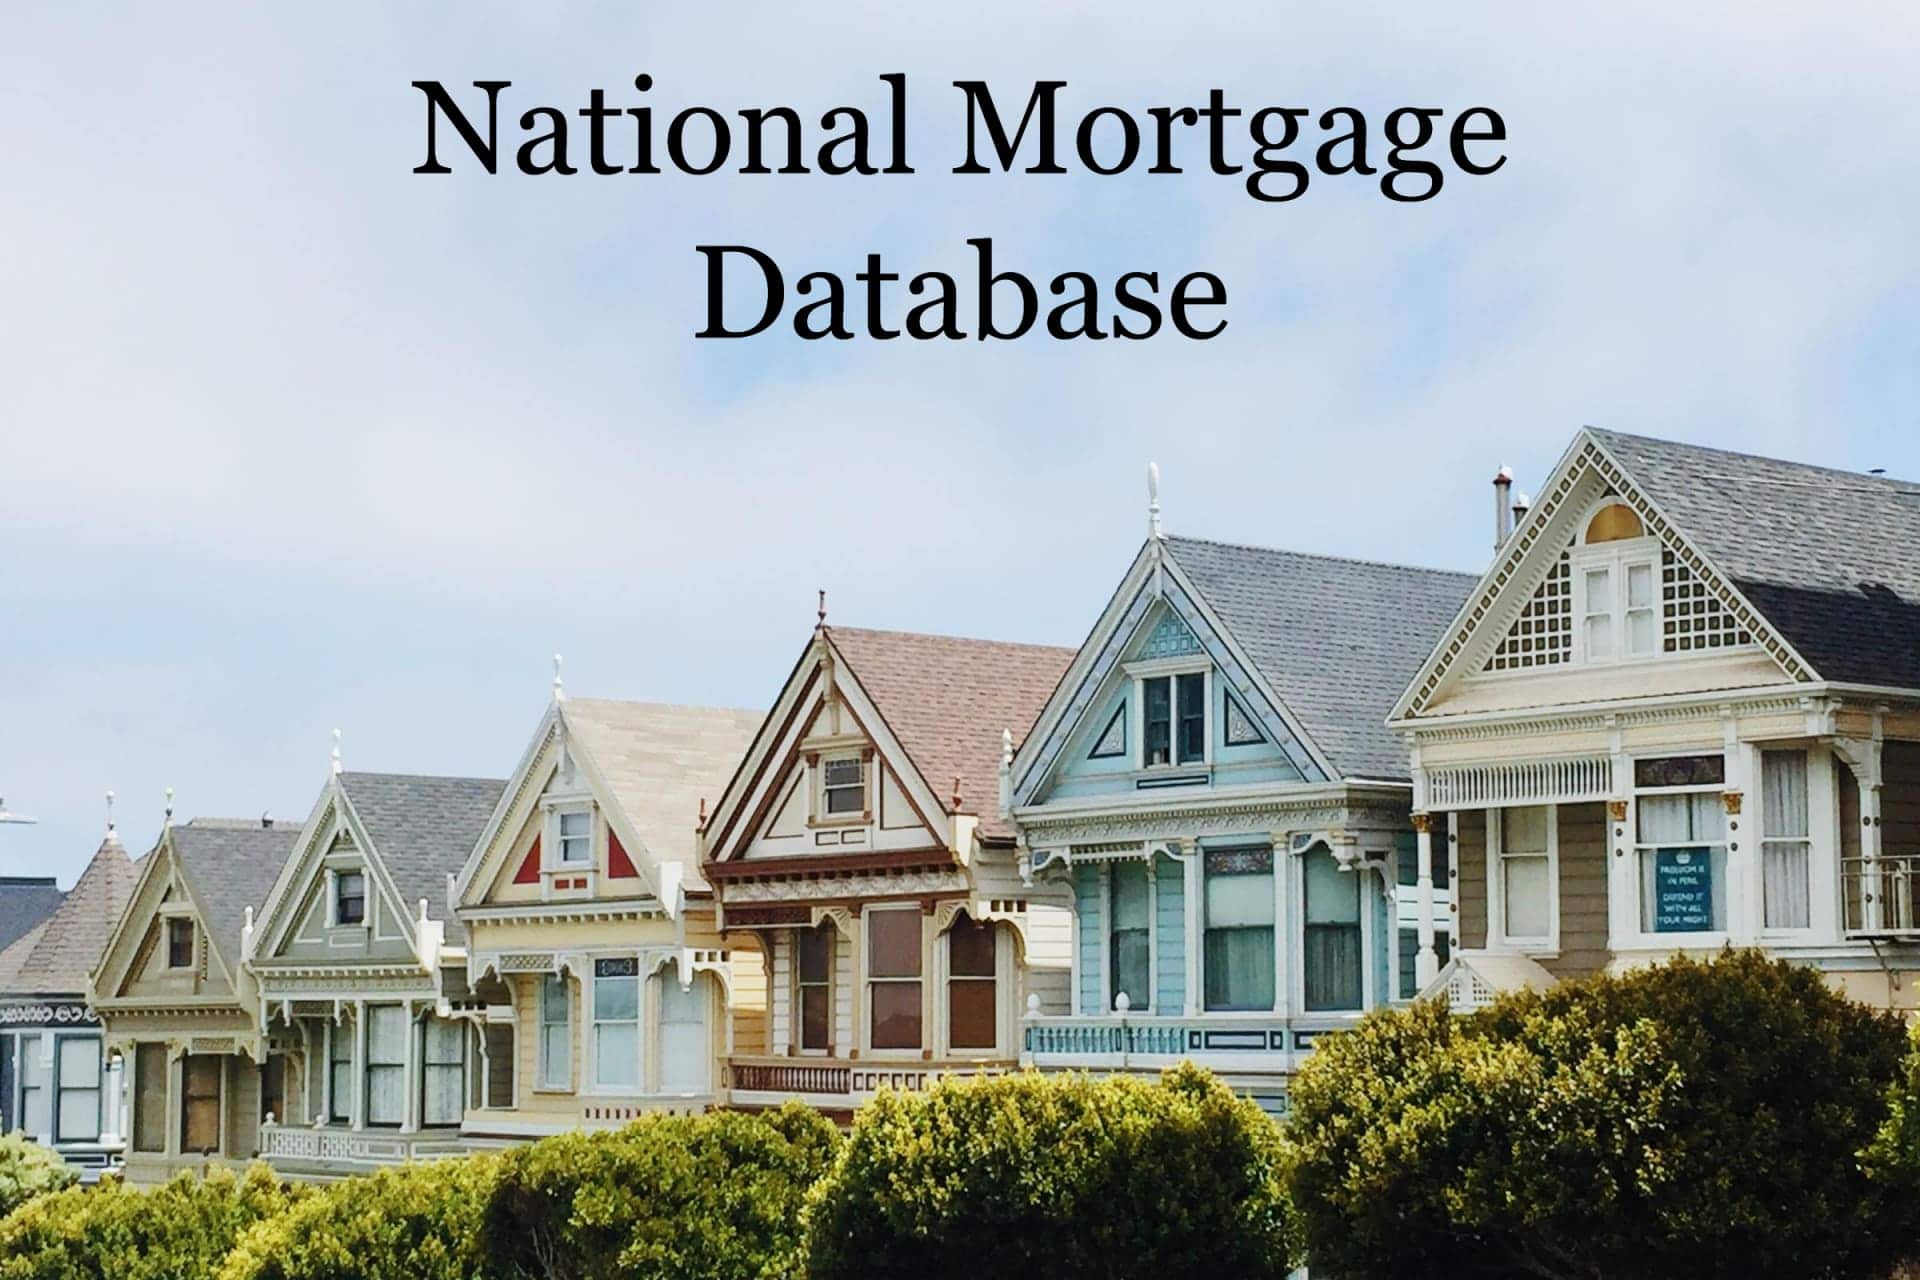 A row of homes listed in the National Mortgage Database